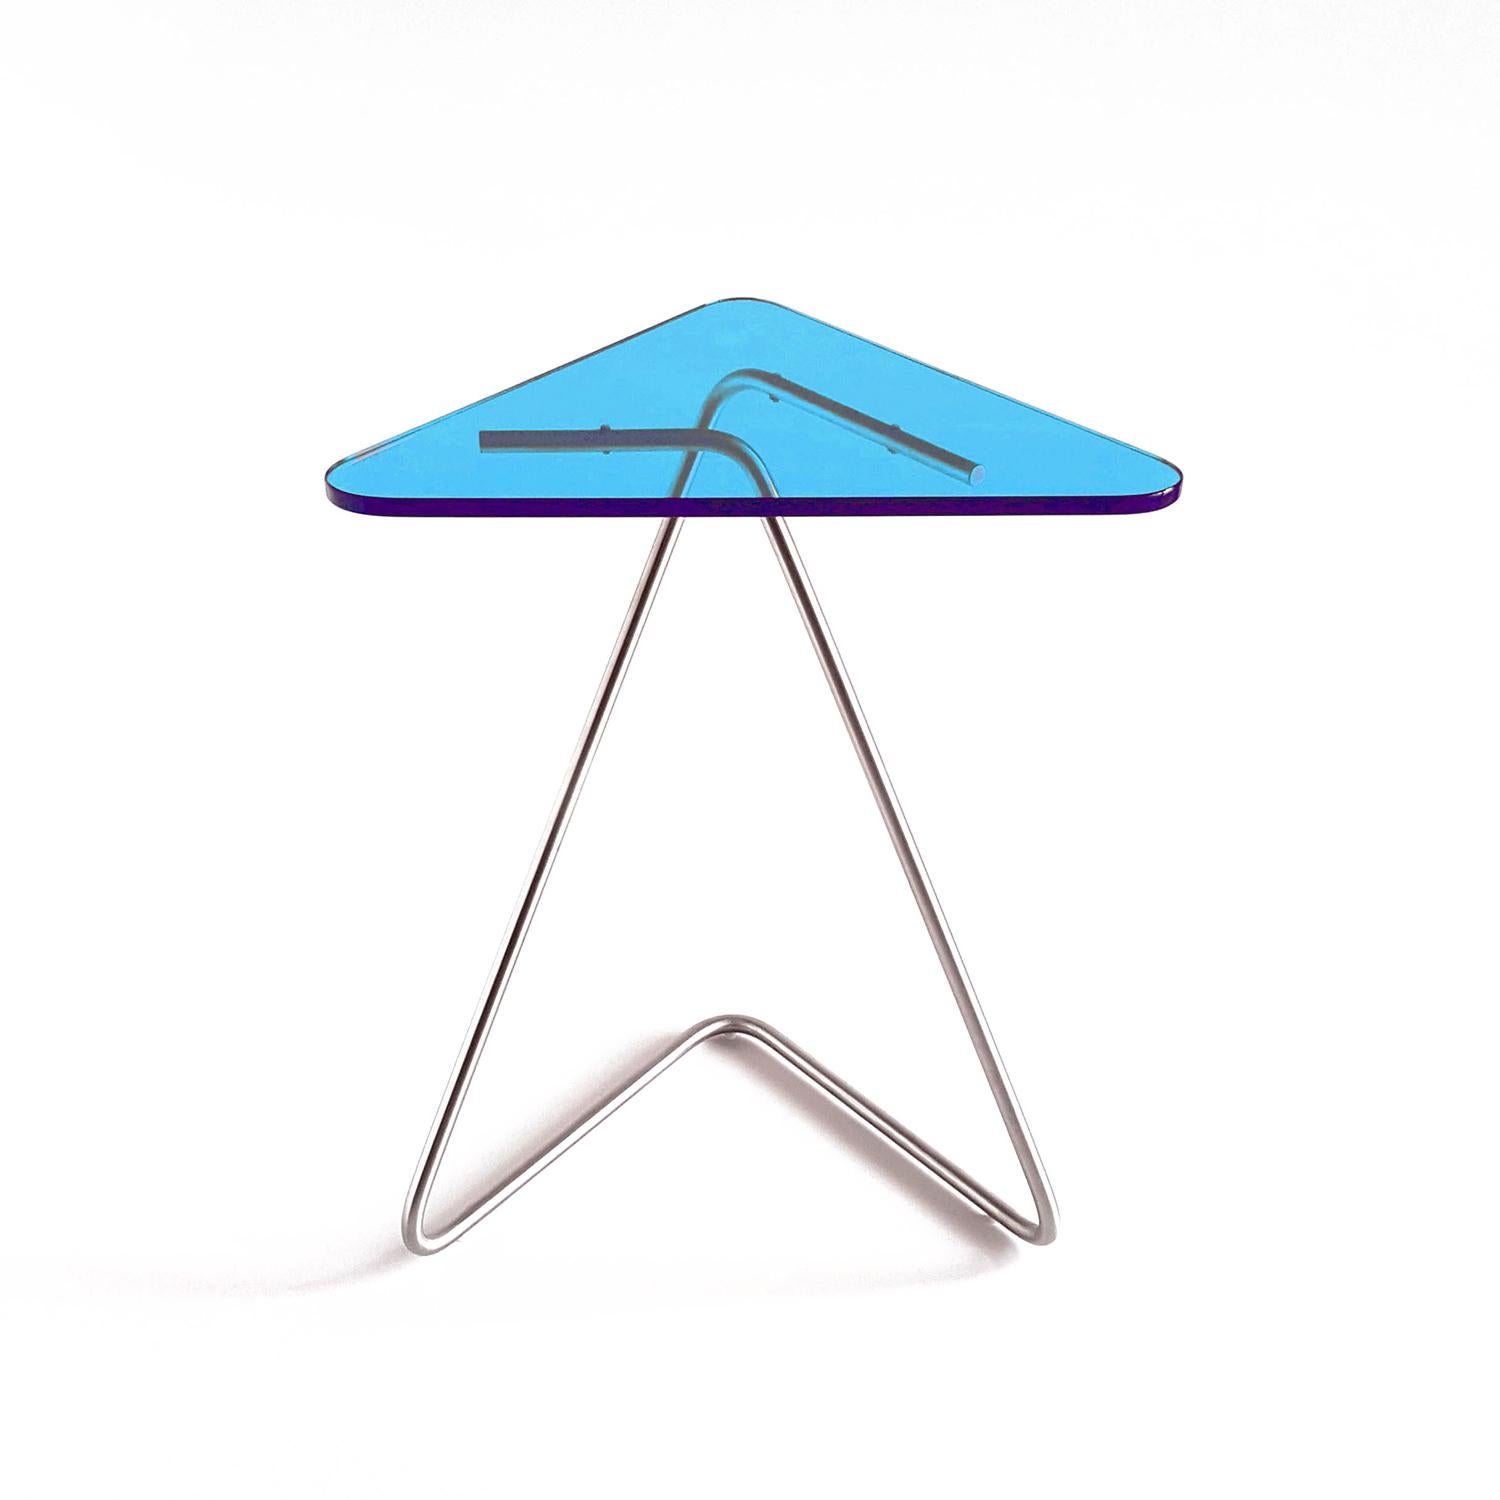 The triangle side table by Rita Kettaneh 
Dimensions: The base: brushed stainless steel 
 Optionally plated with copper or brass
 The top: acrylic
Materials: H 49.5 x W 41 x D 9.5 cm
Weight: 2.6 Kg

Colors and finishes: 
Stainless finish: